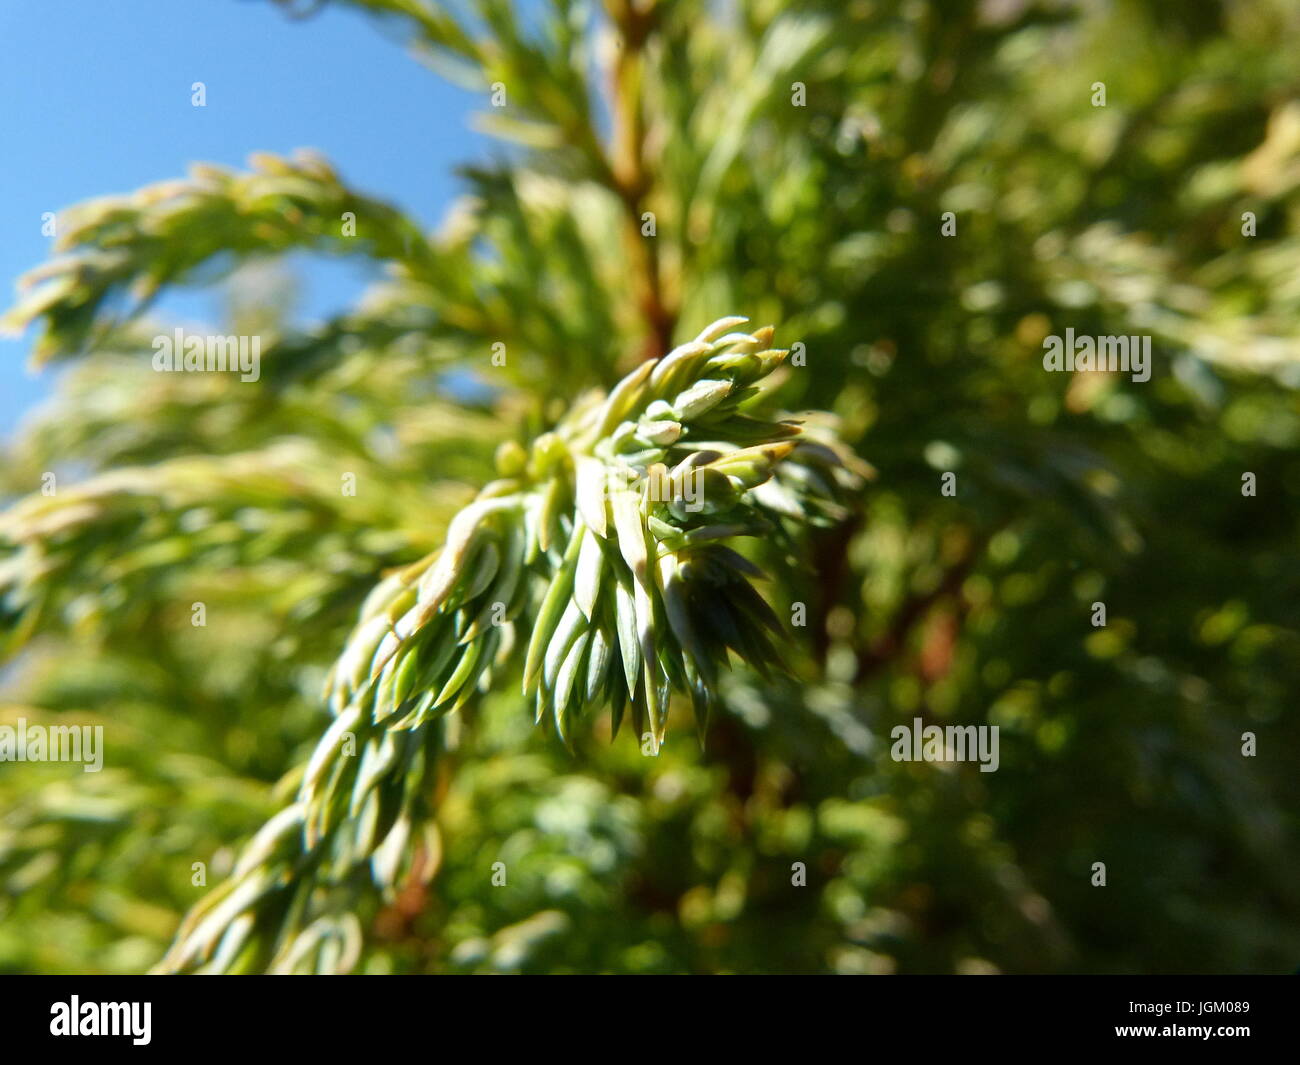 Leaves of Lawson's cypress Stock Photo